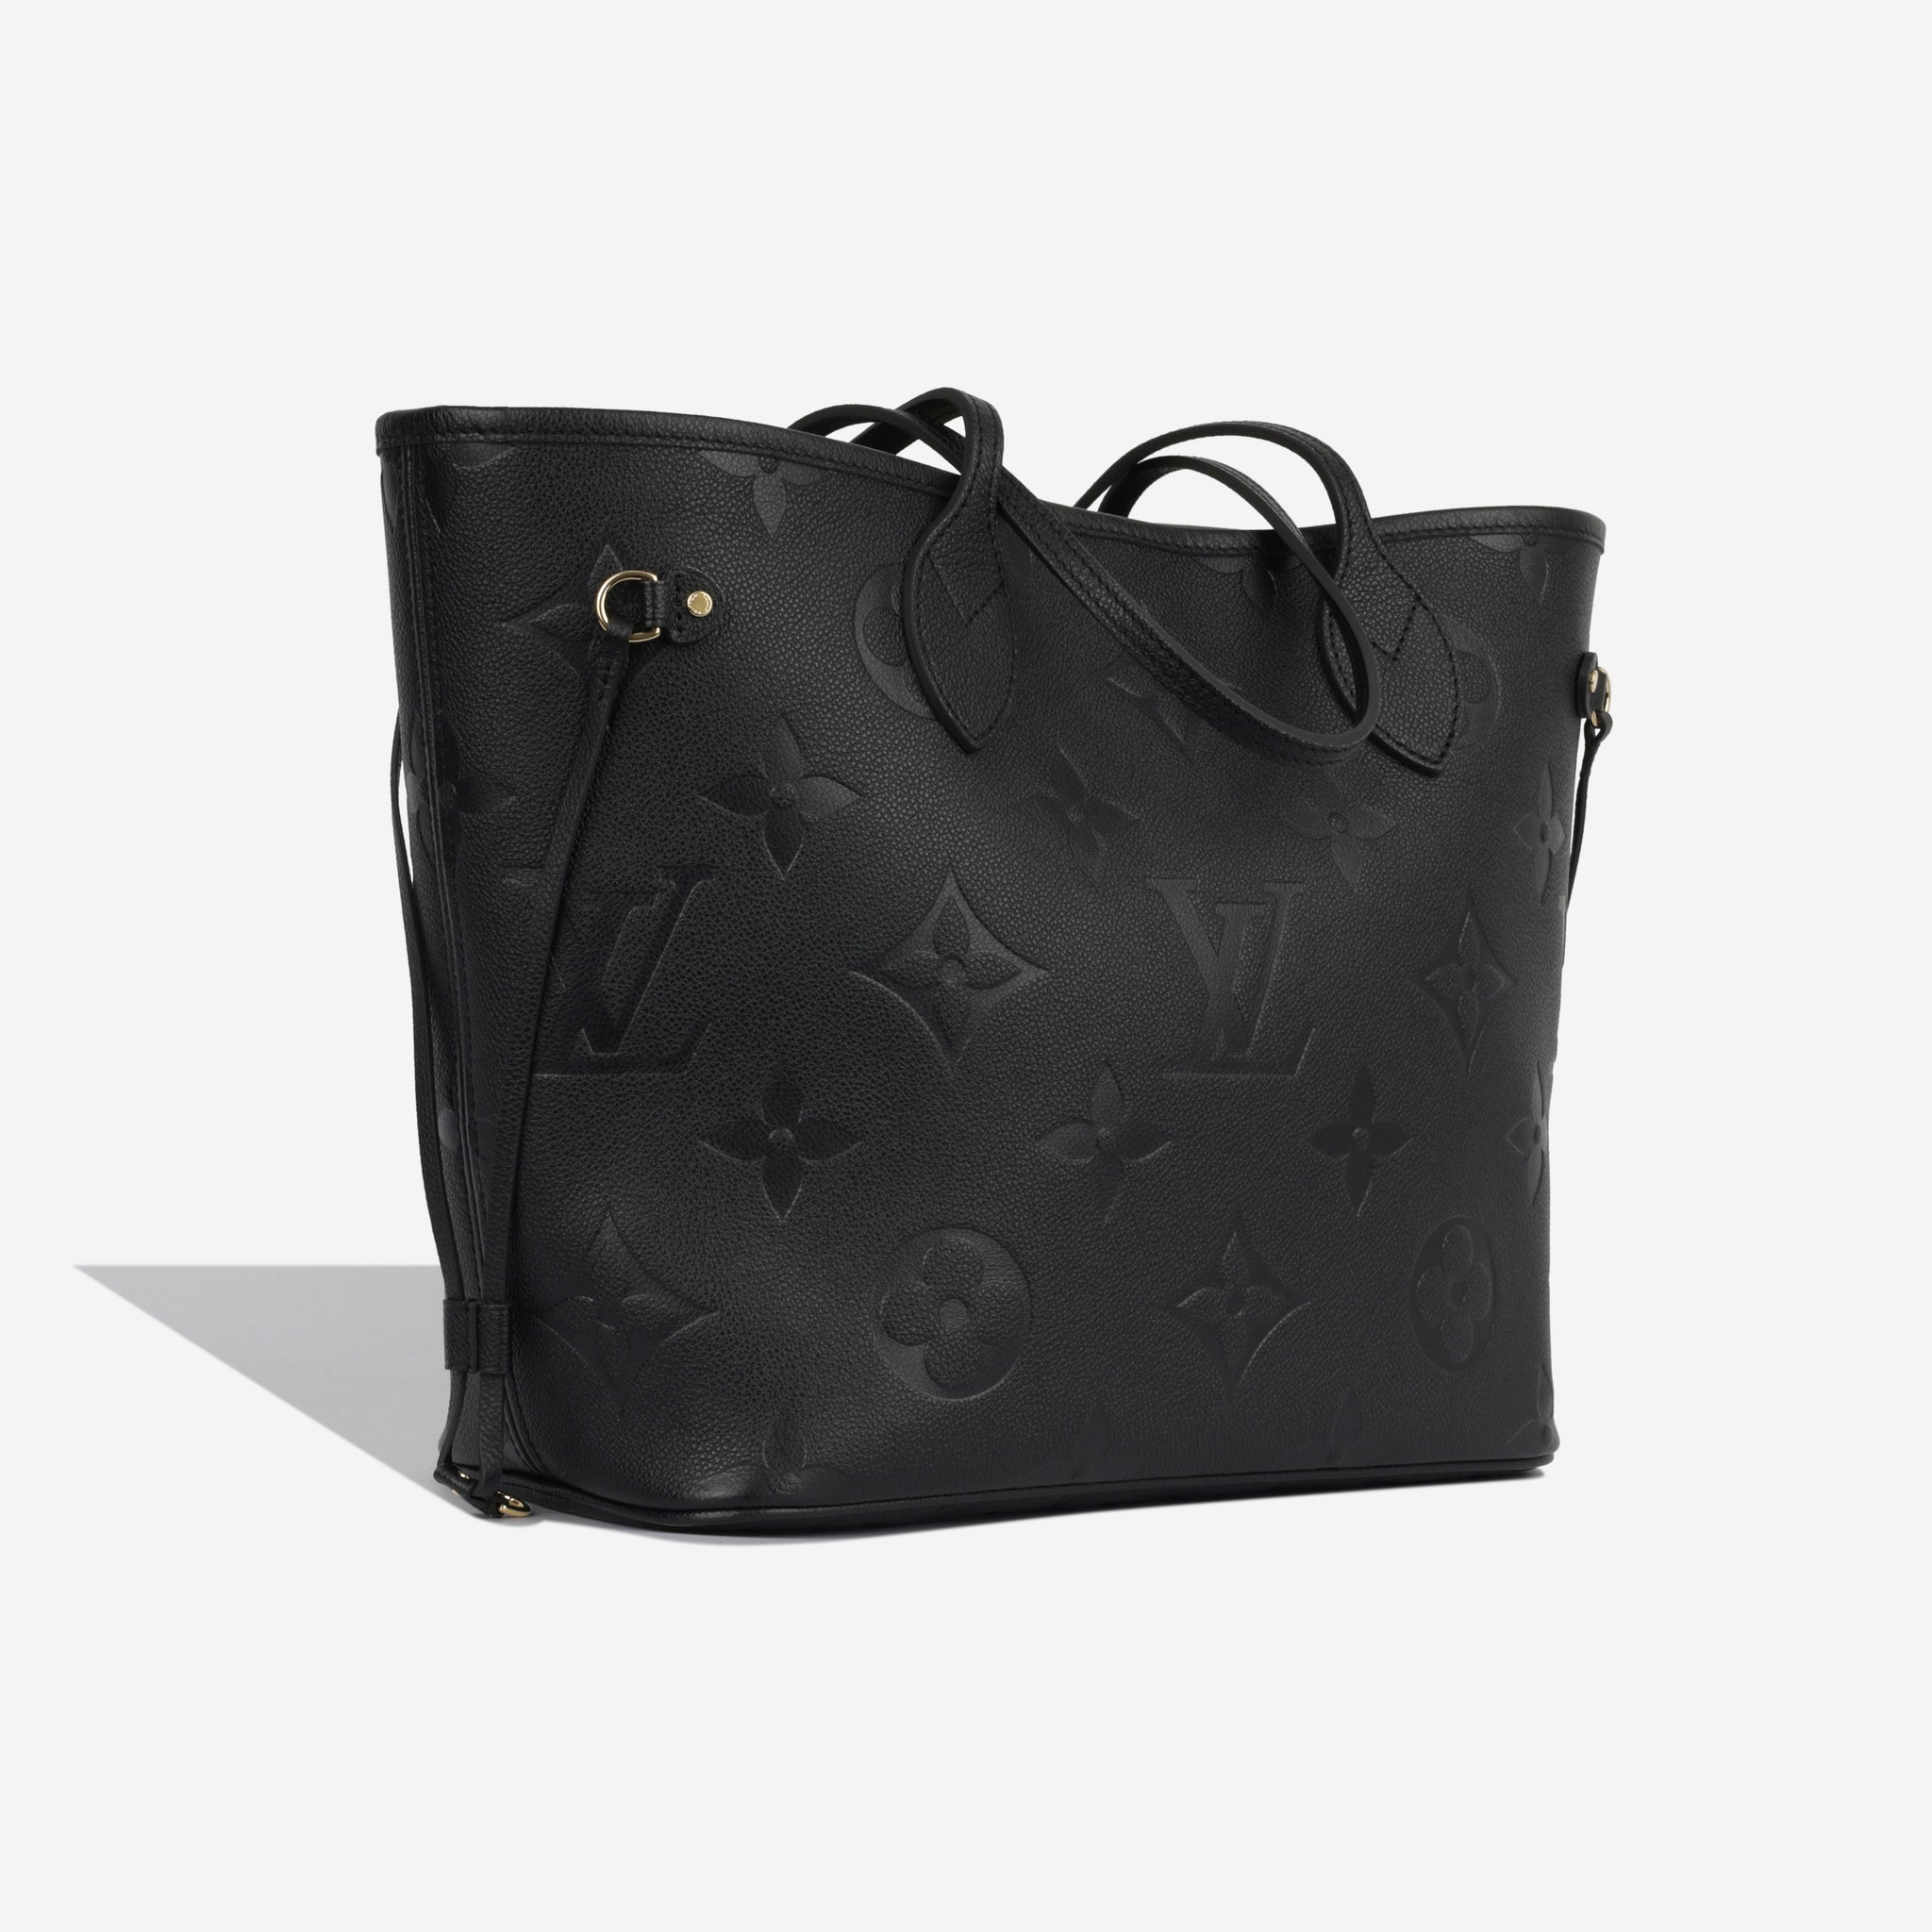 LOUIS VUITTON NEVERFULL MM EMPREINTE LEATHER / LV bag in detail